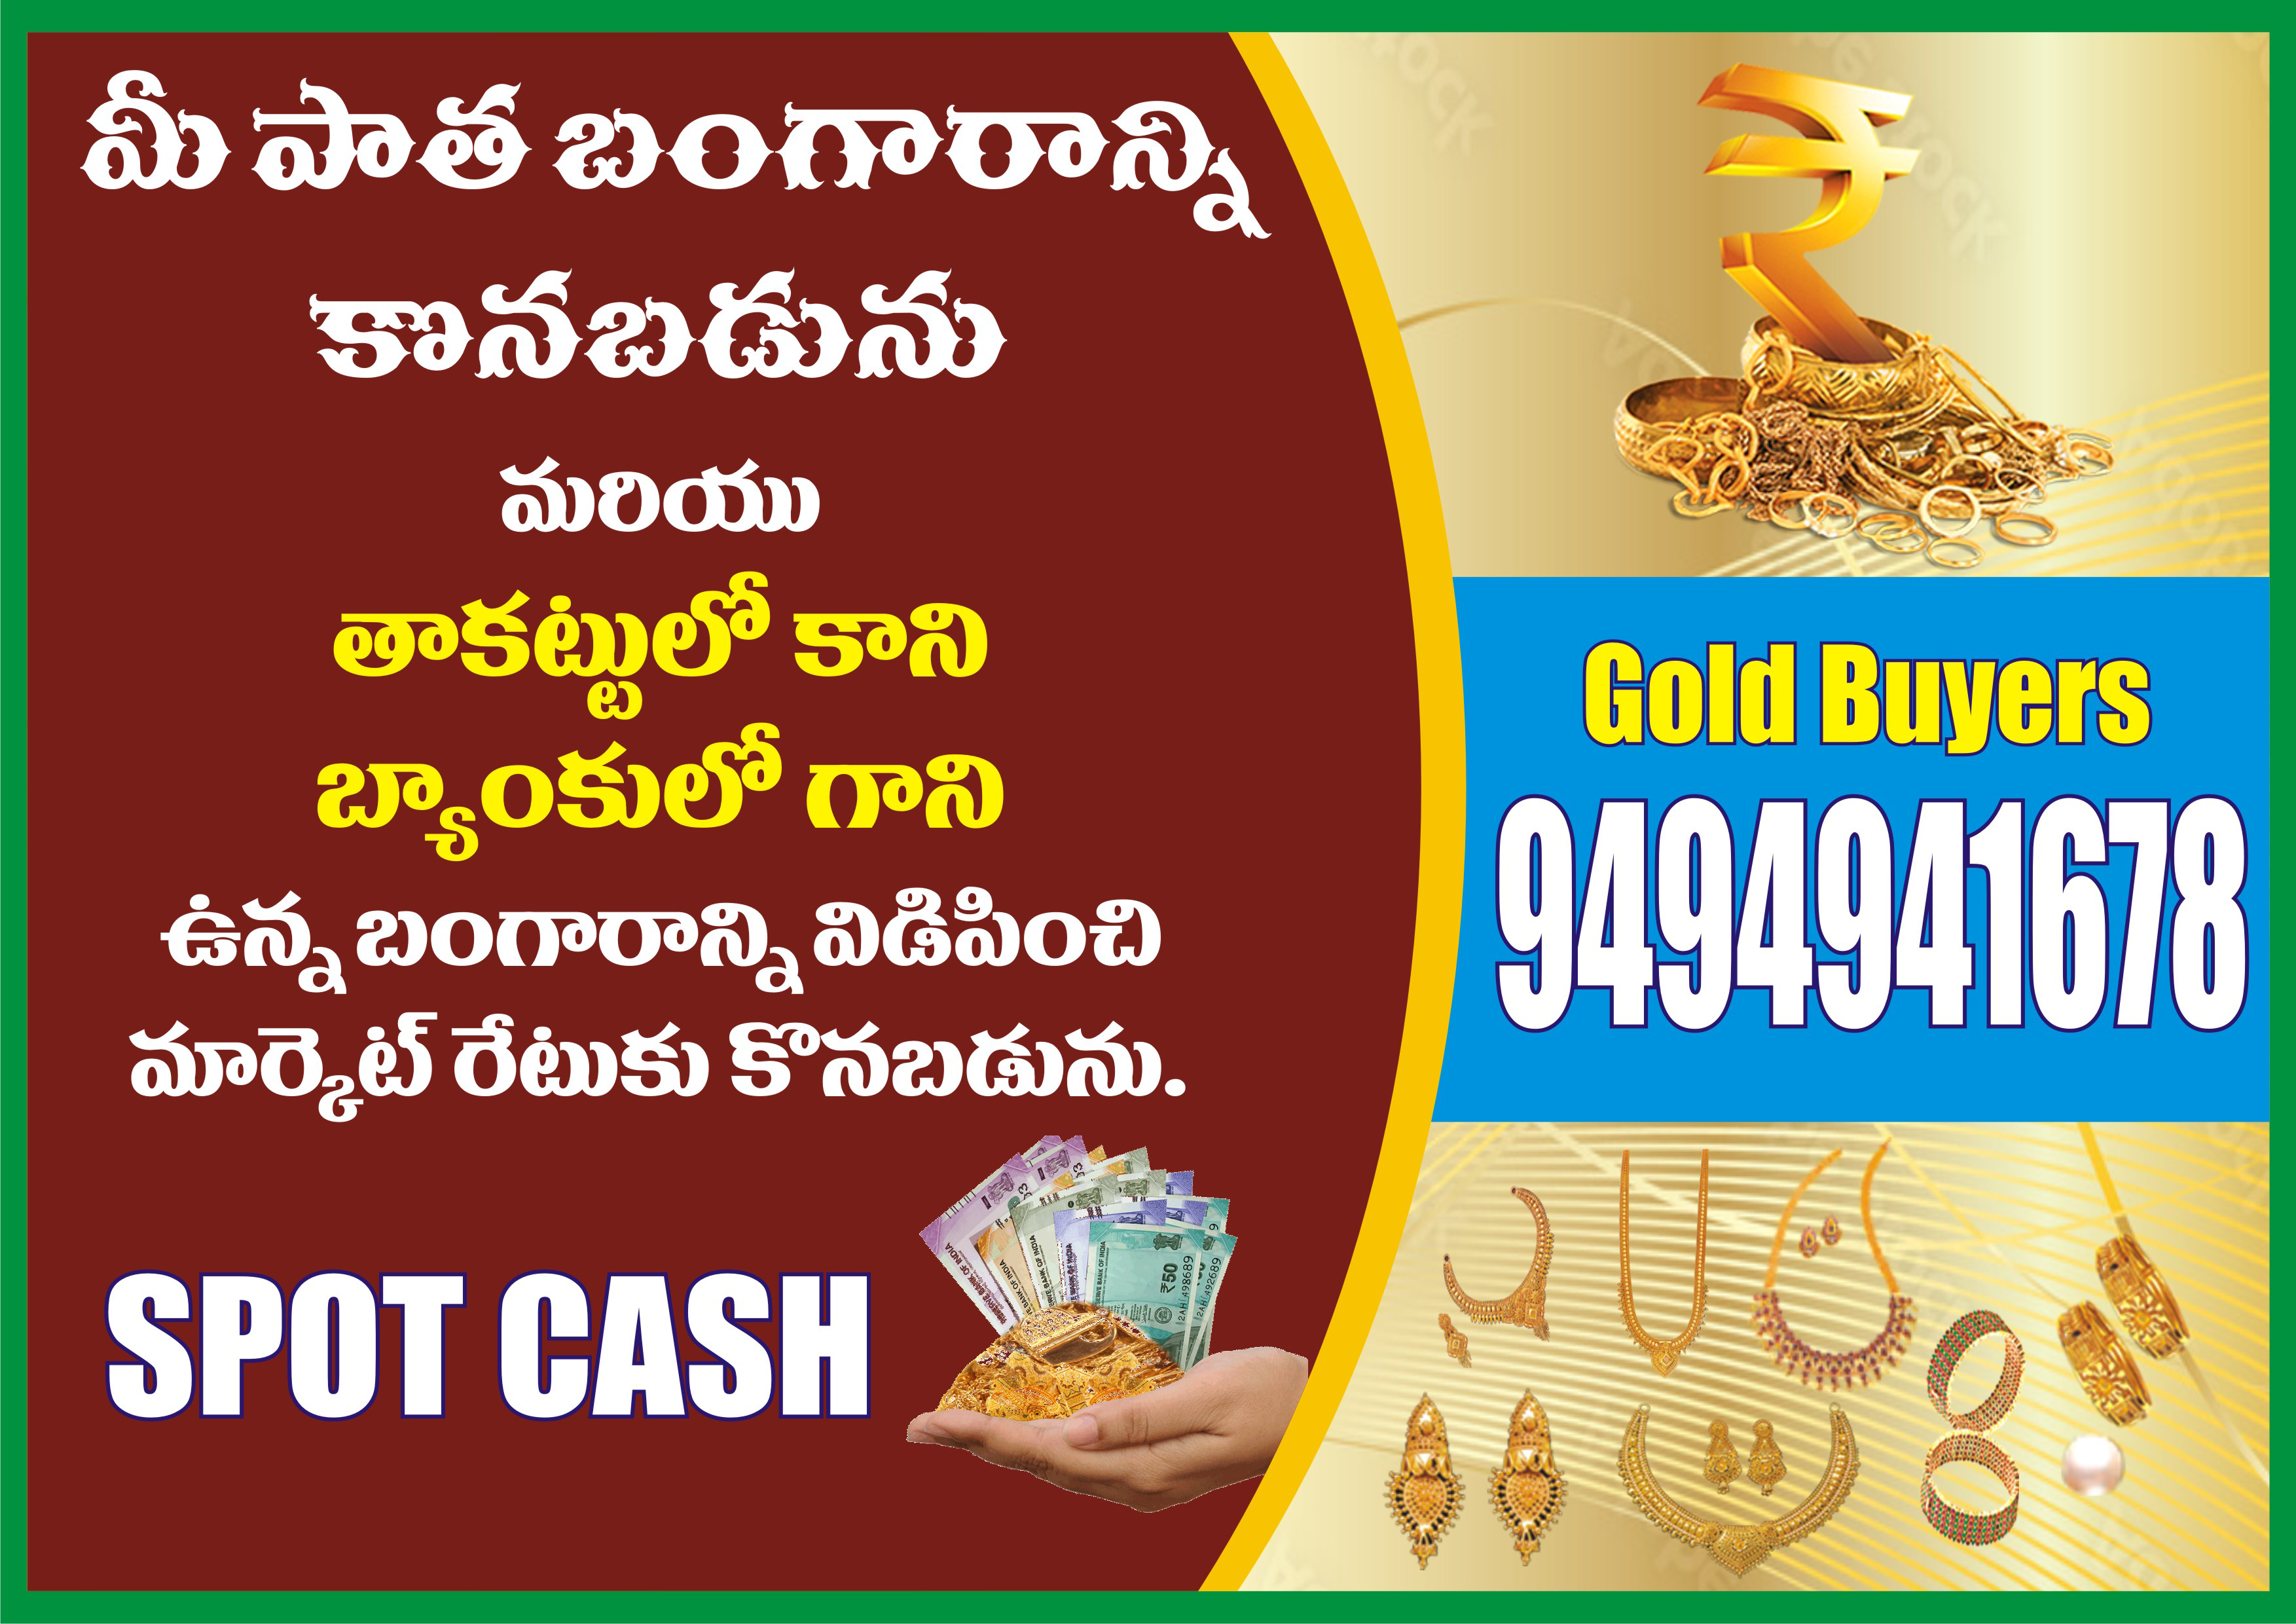 "Gold Buyers in Hyderabad - Trusted experts offering top value for your gold items. Sell your gold jewelry, coins, and scrap gold for instant cash. Reliable and transparent transactions in Hyderabad, Ameerpet, Secunderabad, Jubilee Hills, Banjara Hills, and more. Visit us for a seamless gold selling experience."